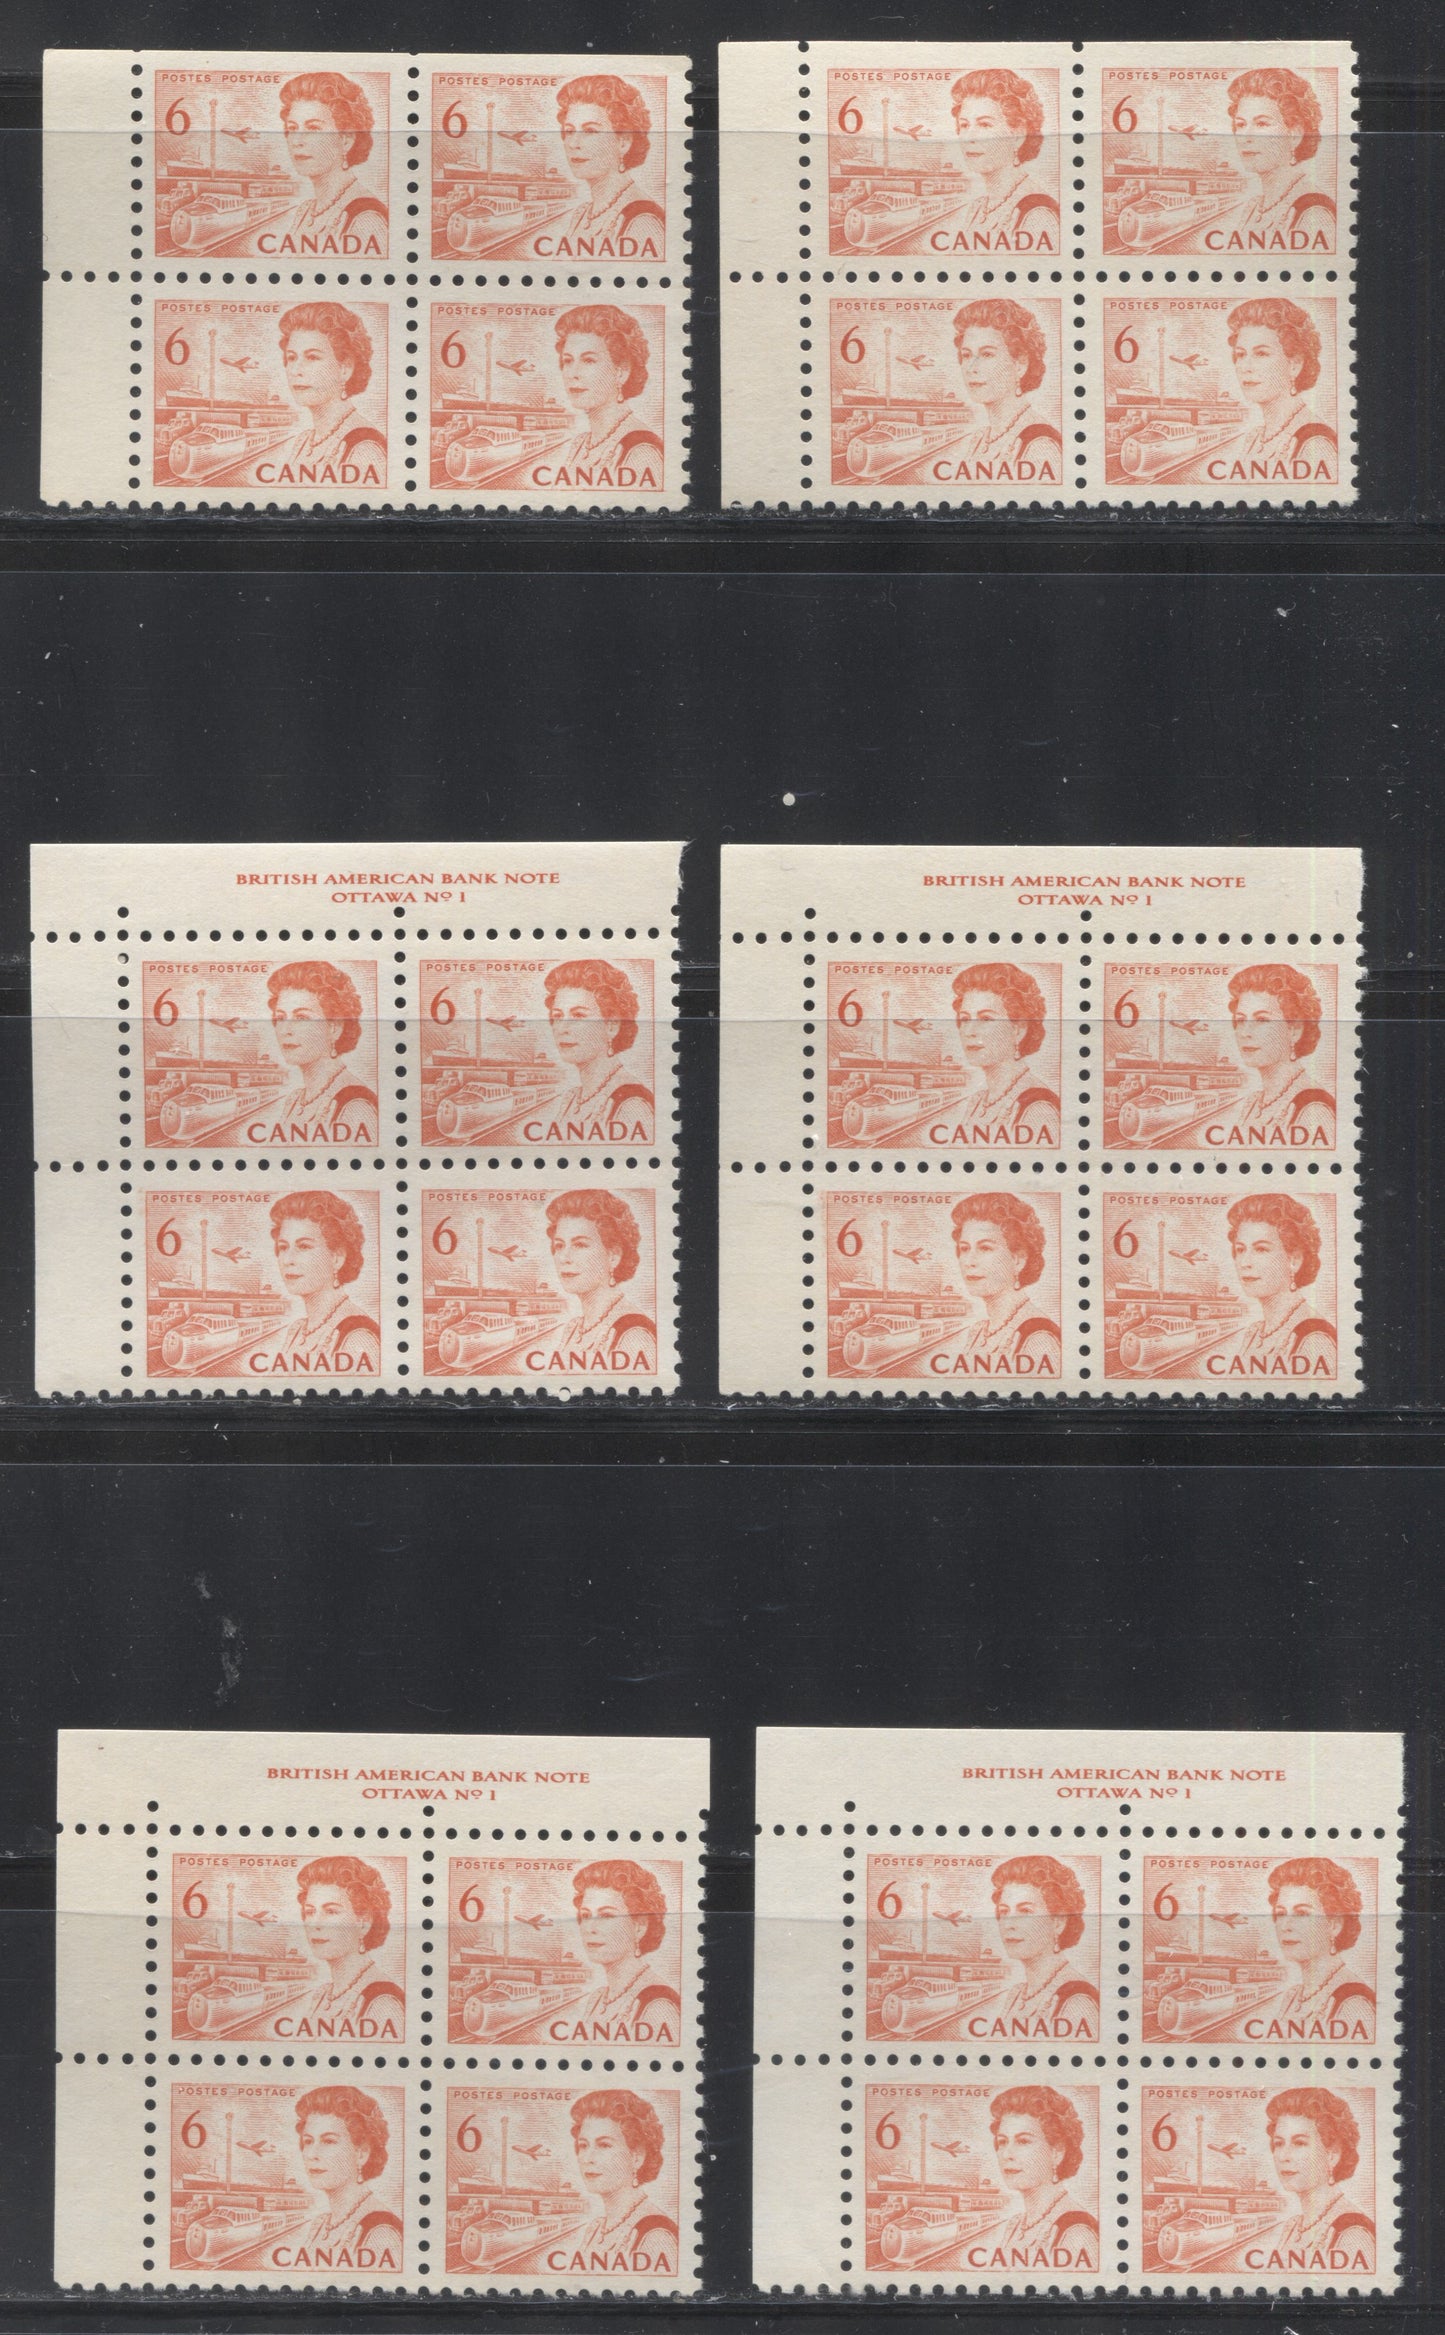 Lot 141 Canada #459i 6c Orange Transportation, 1967-1973 Centennial Definitive Issue, Five VFNH UL Blank & Plate 1 Blocks Of 4 On Various LF-fl Papers, Deep Orange Red Ink Under UV With Dex Gums